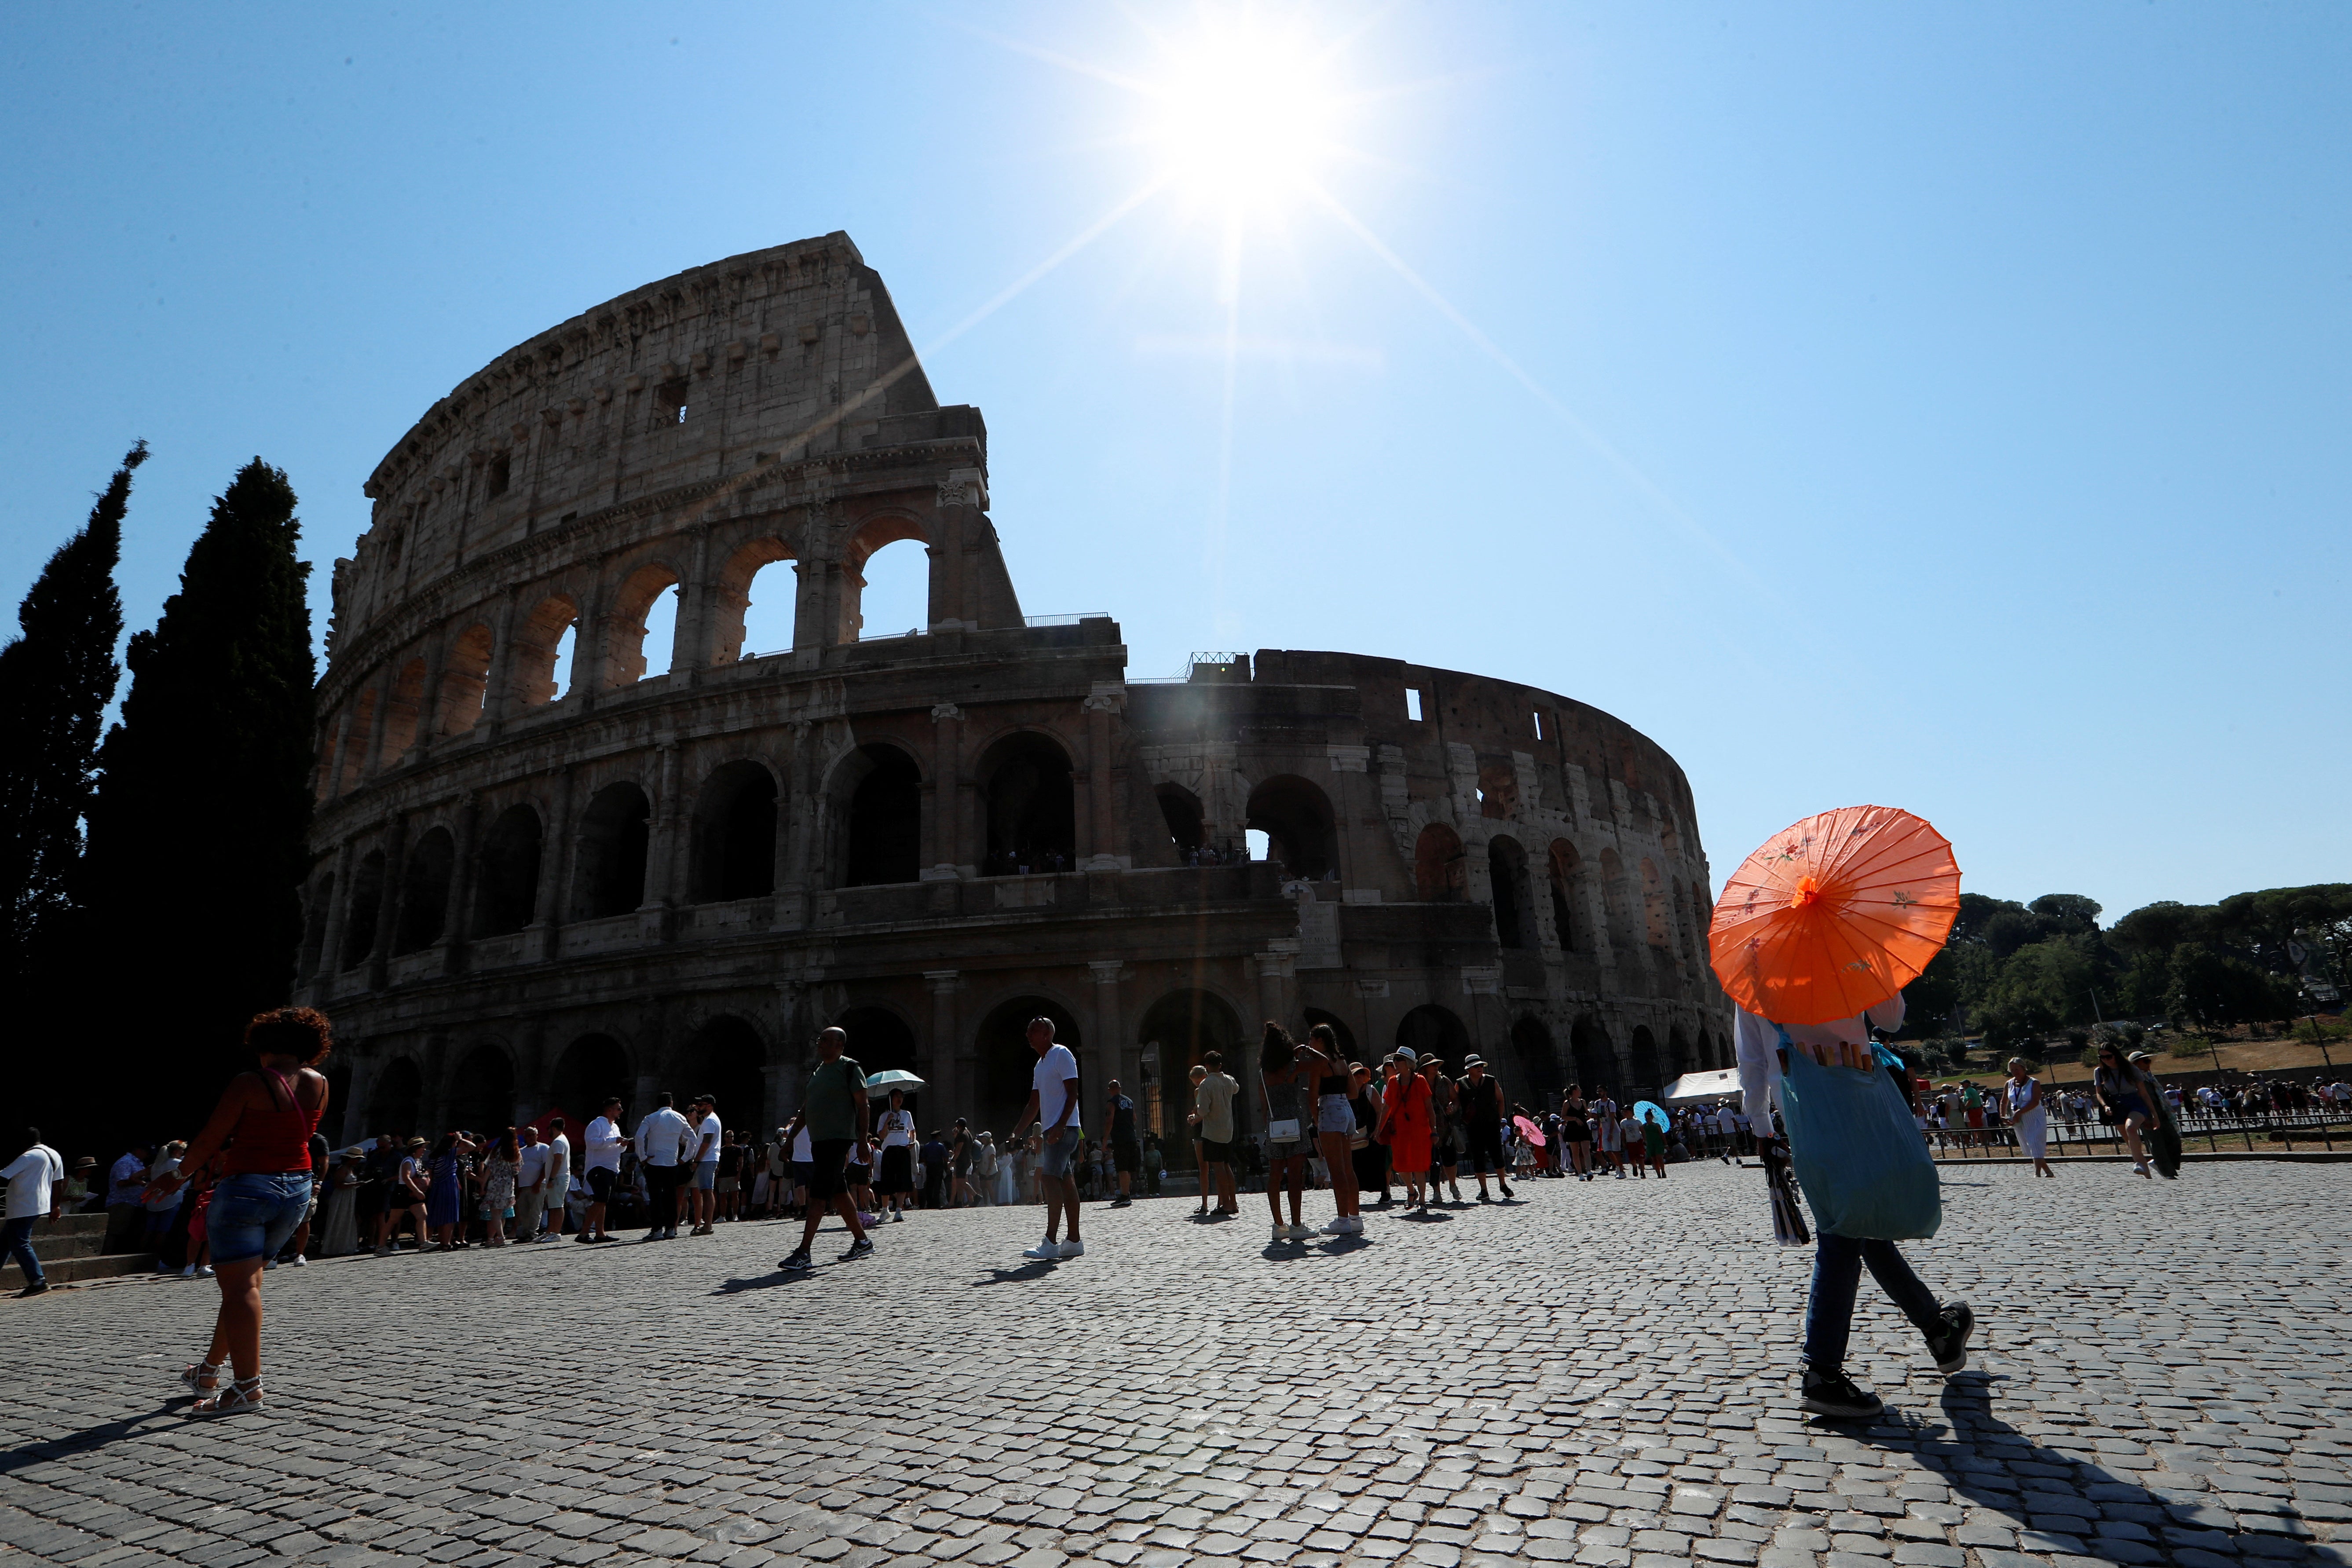 People walk near the Colosseum during a new heatwave as temperatures are expected to reach 40 degrees Celsius in some cities